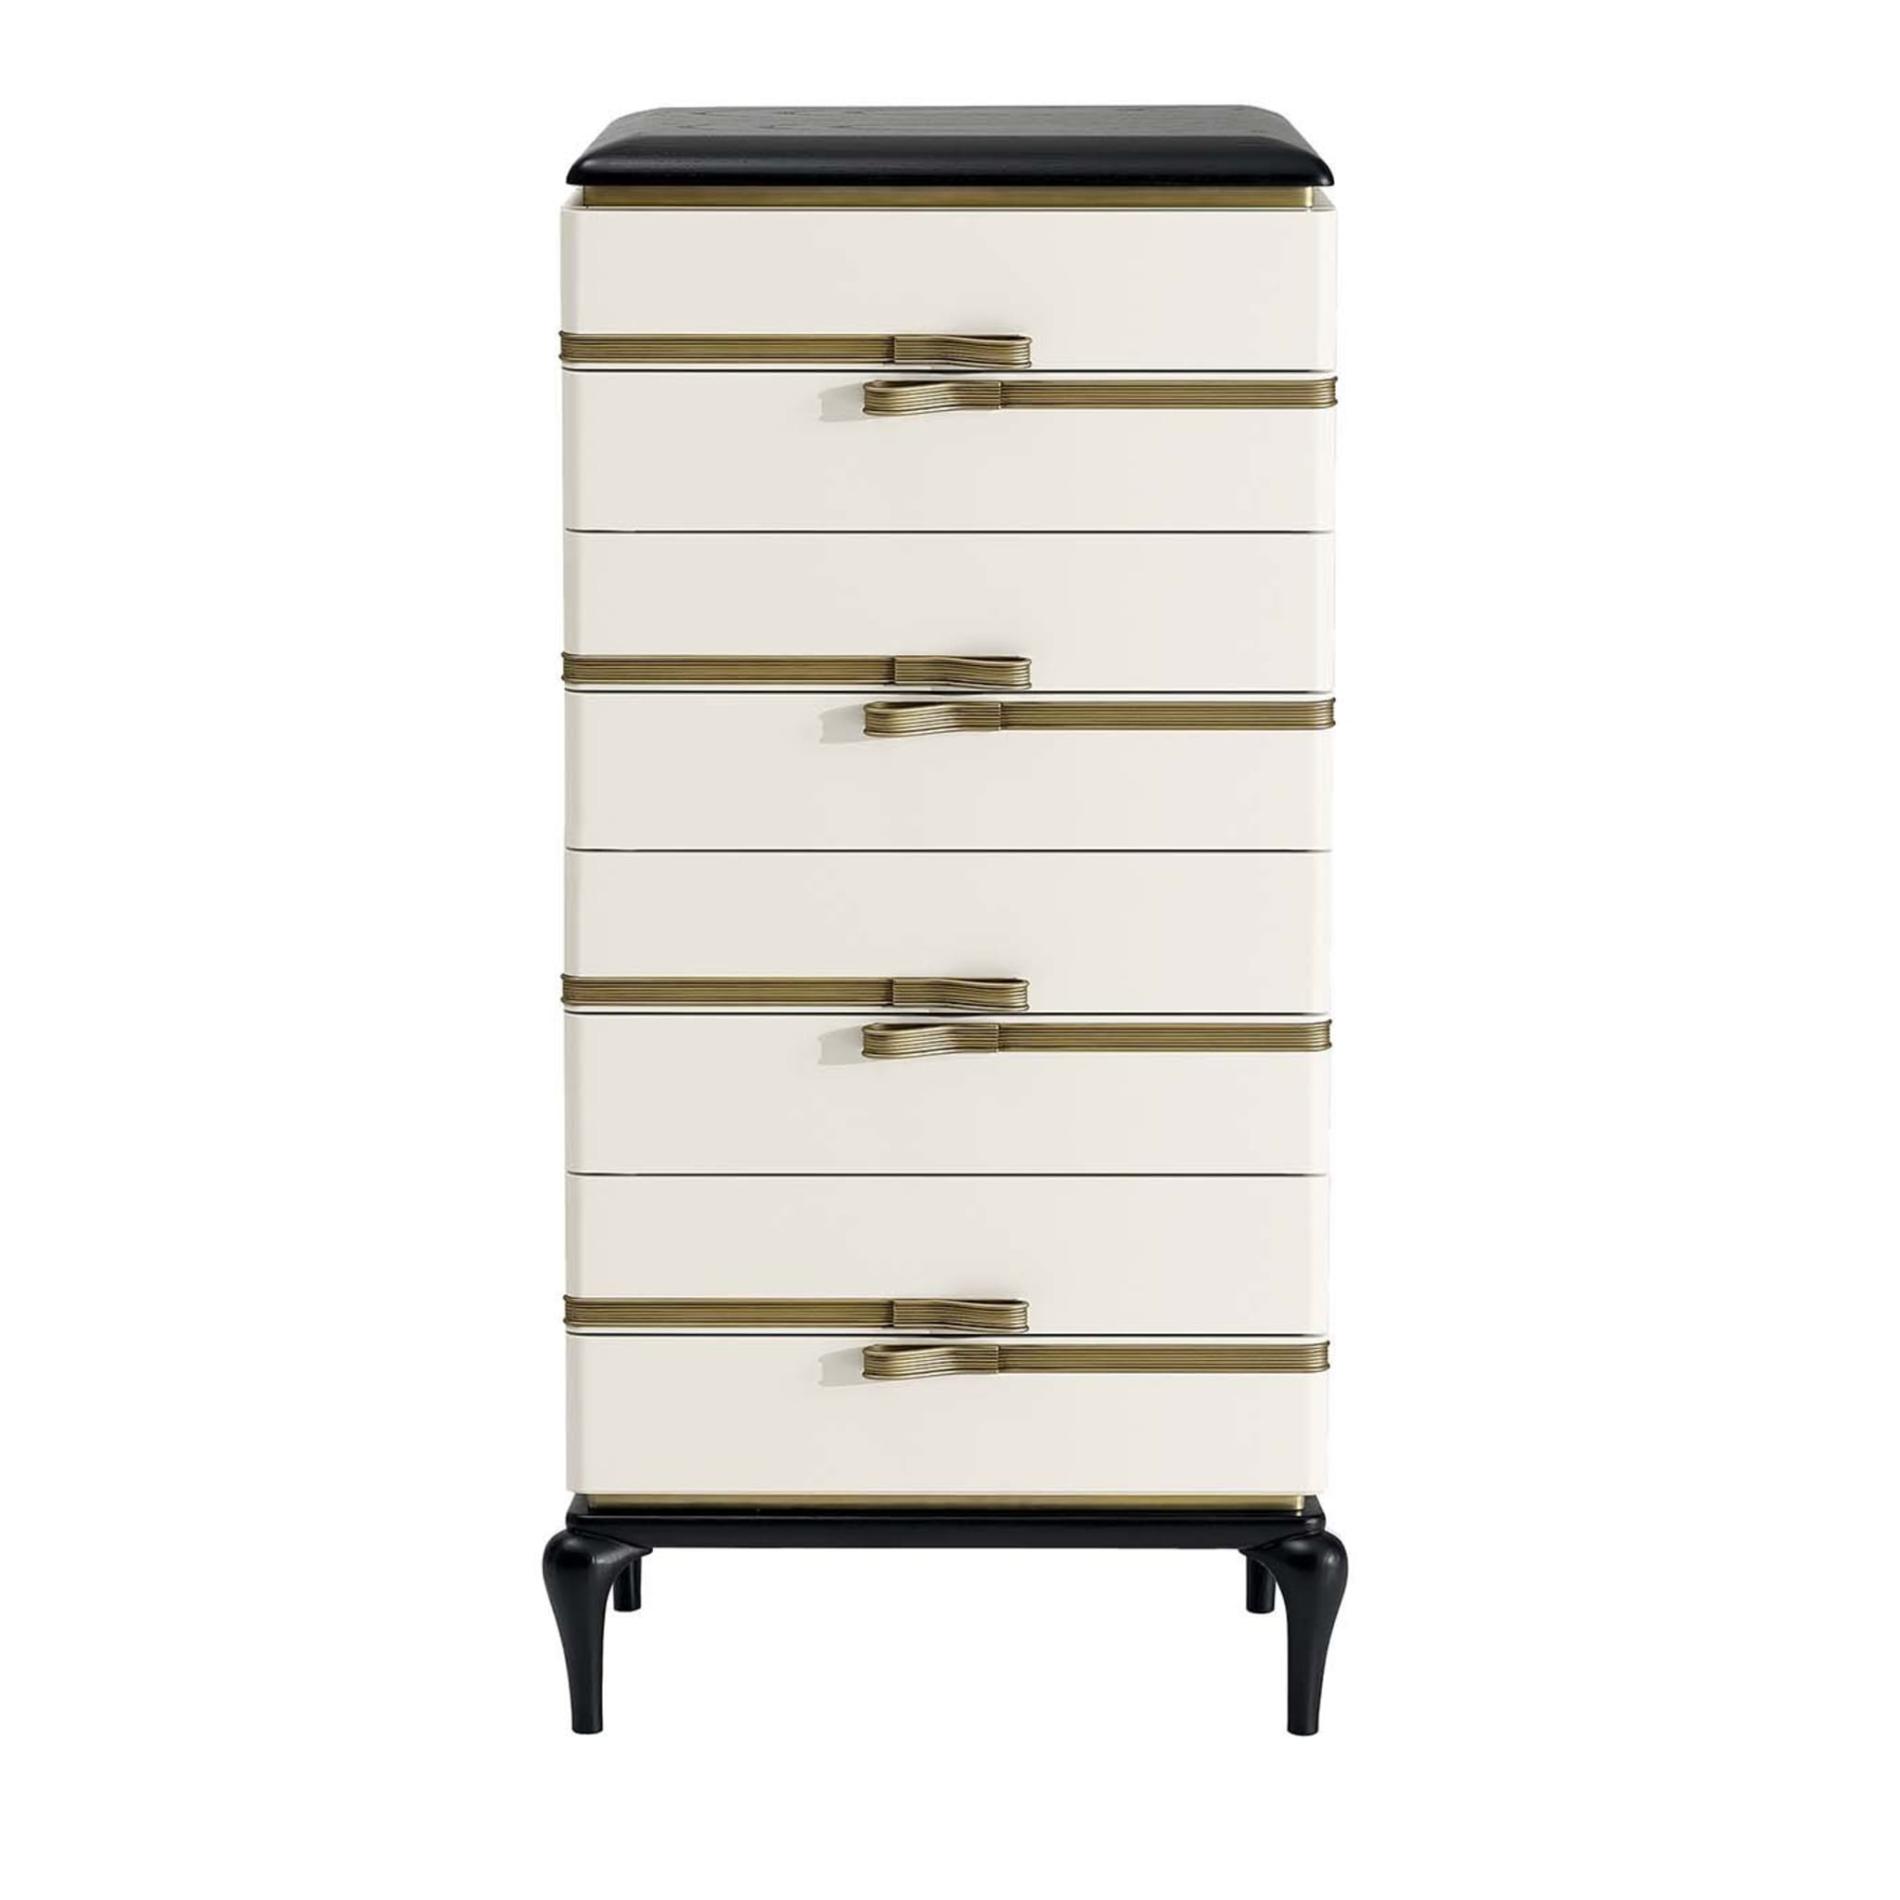 Dilan Glamour Tall Chest of Drawers